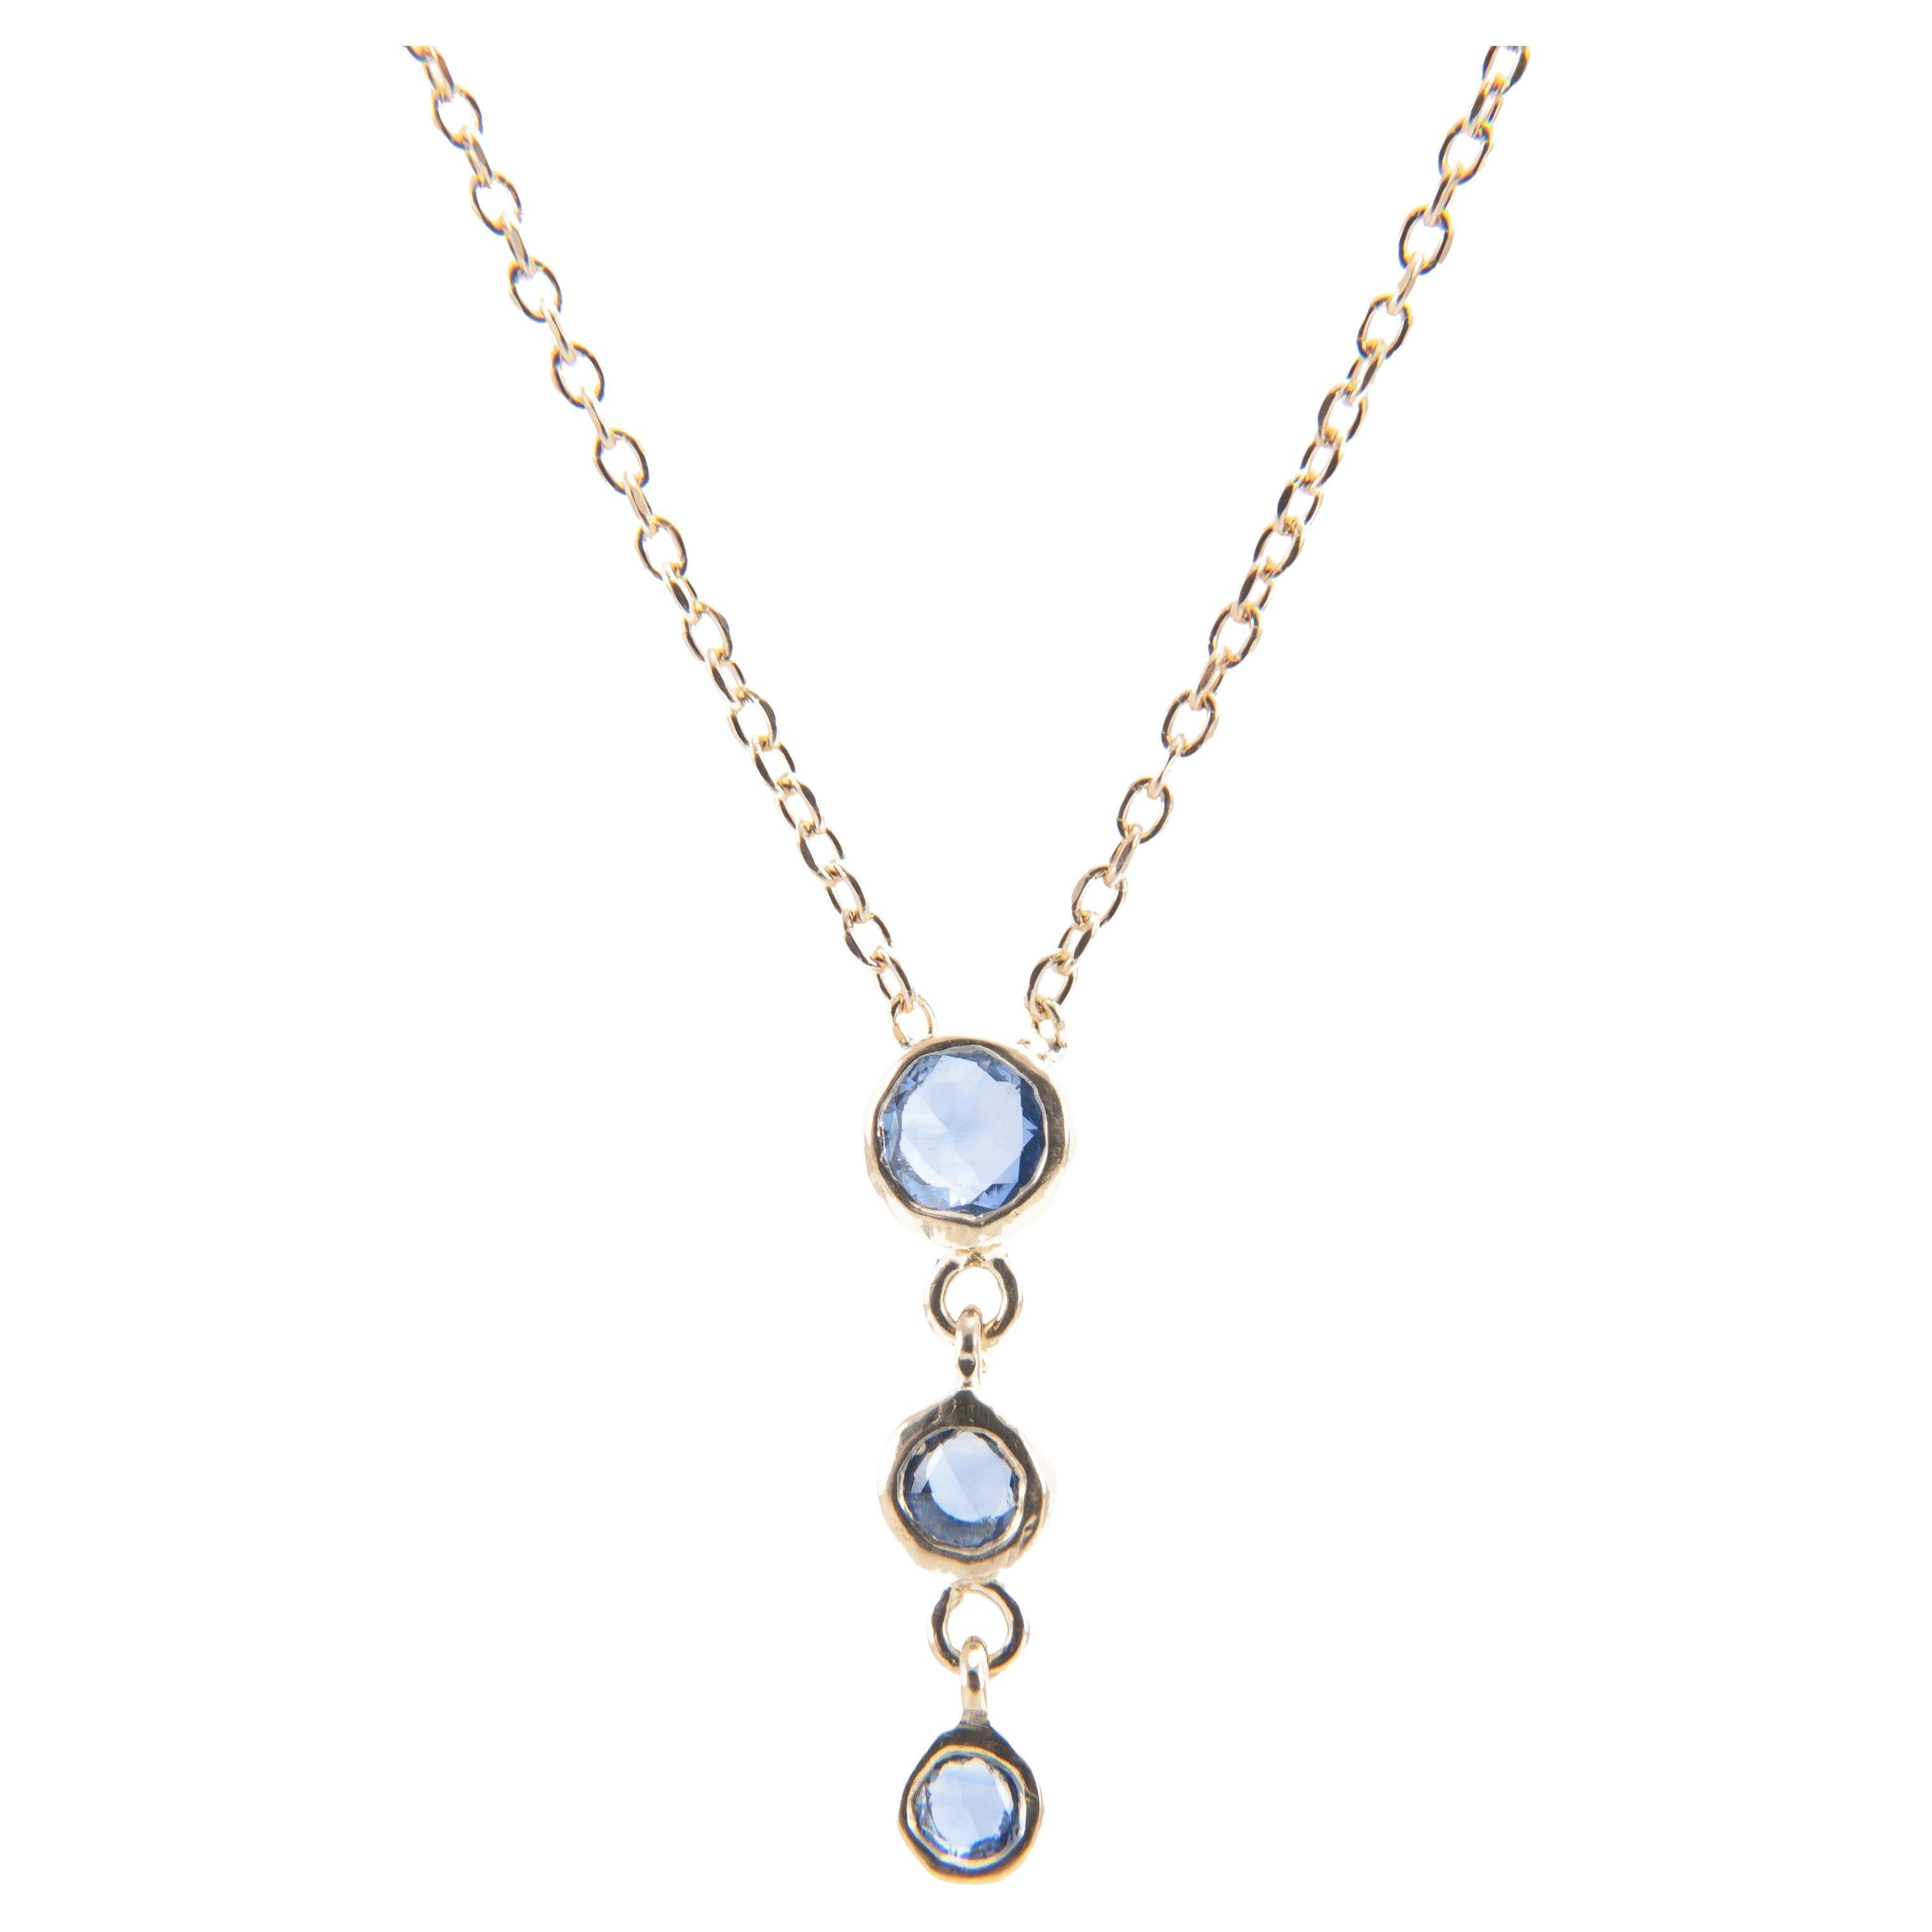 A row of graduated rose cut blue sapphires adds just the right amount of sparkle to this delicate necklace.

18K yellow gold chain
Drop pendant of 3 graduated rose cut blue sapphires
0.25 total carat weight
16 inch chain